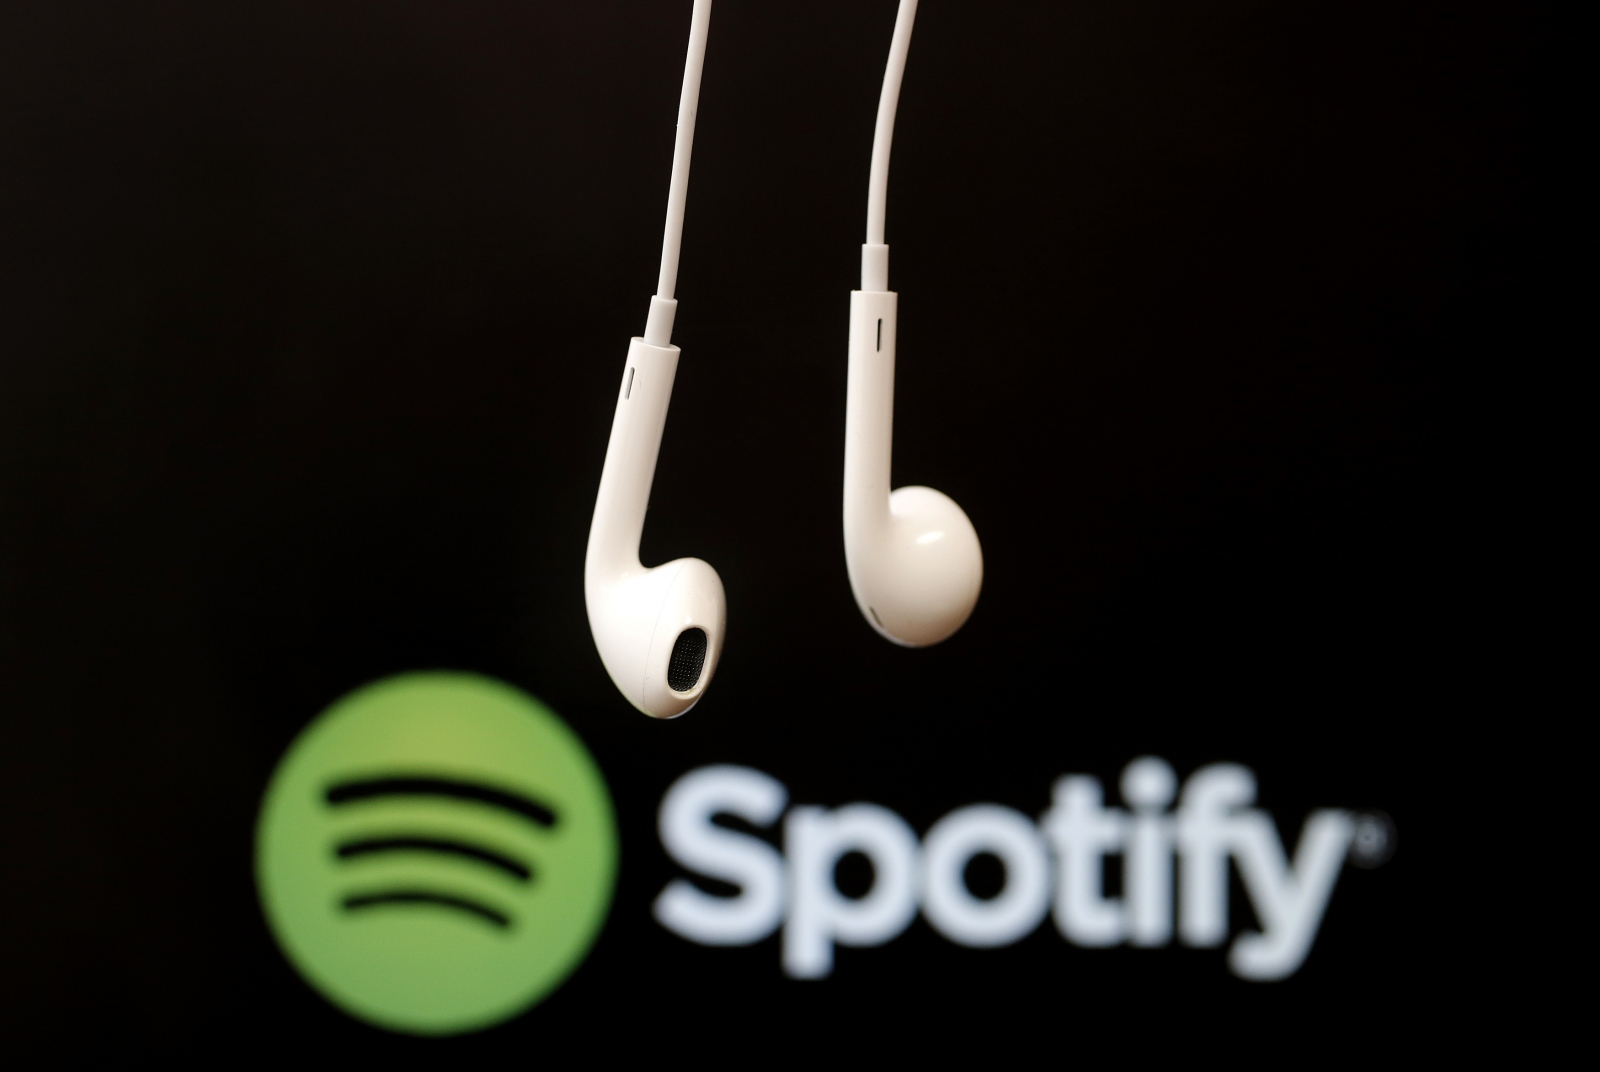 Are free Spotify playlists about to get a lot worse with this major change?